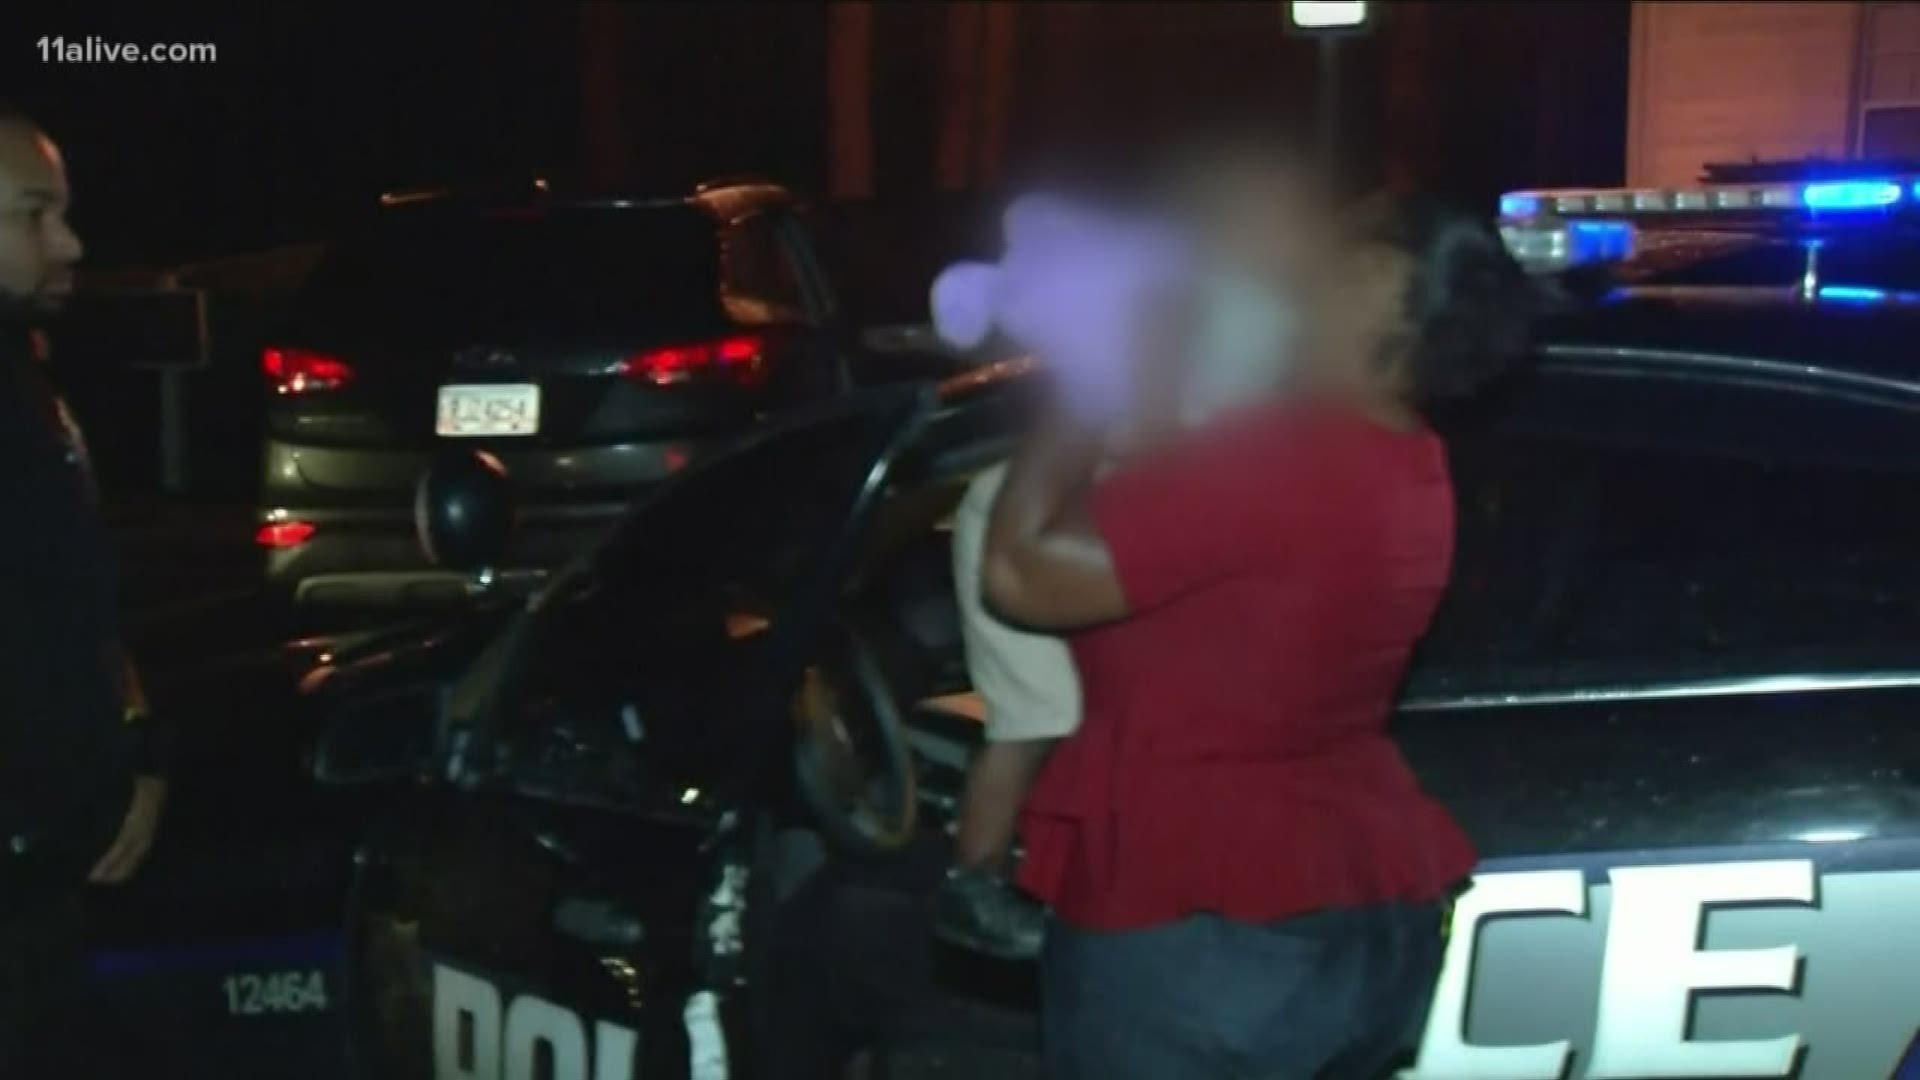 A mom lived her worst nightmare overnight after someone stole her car with her child inside.